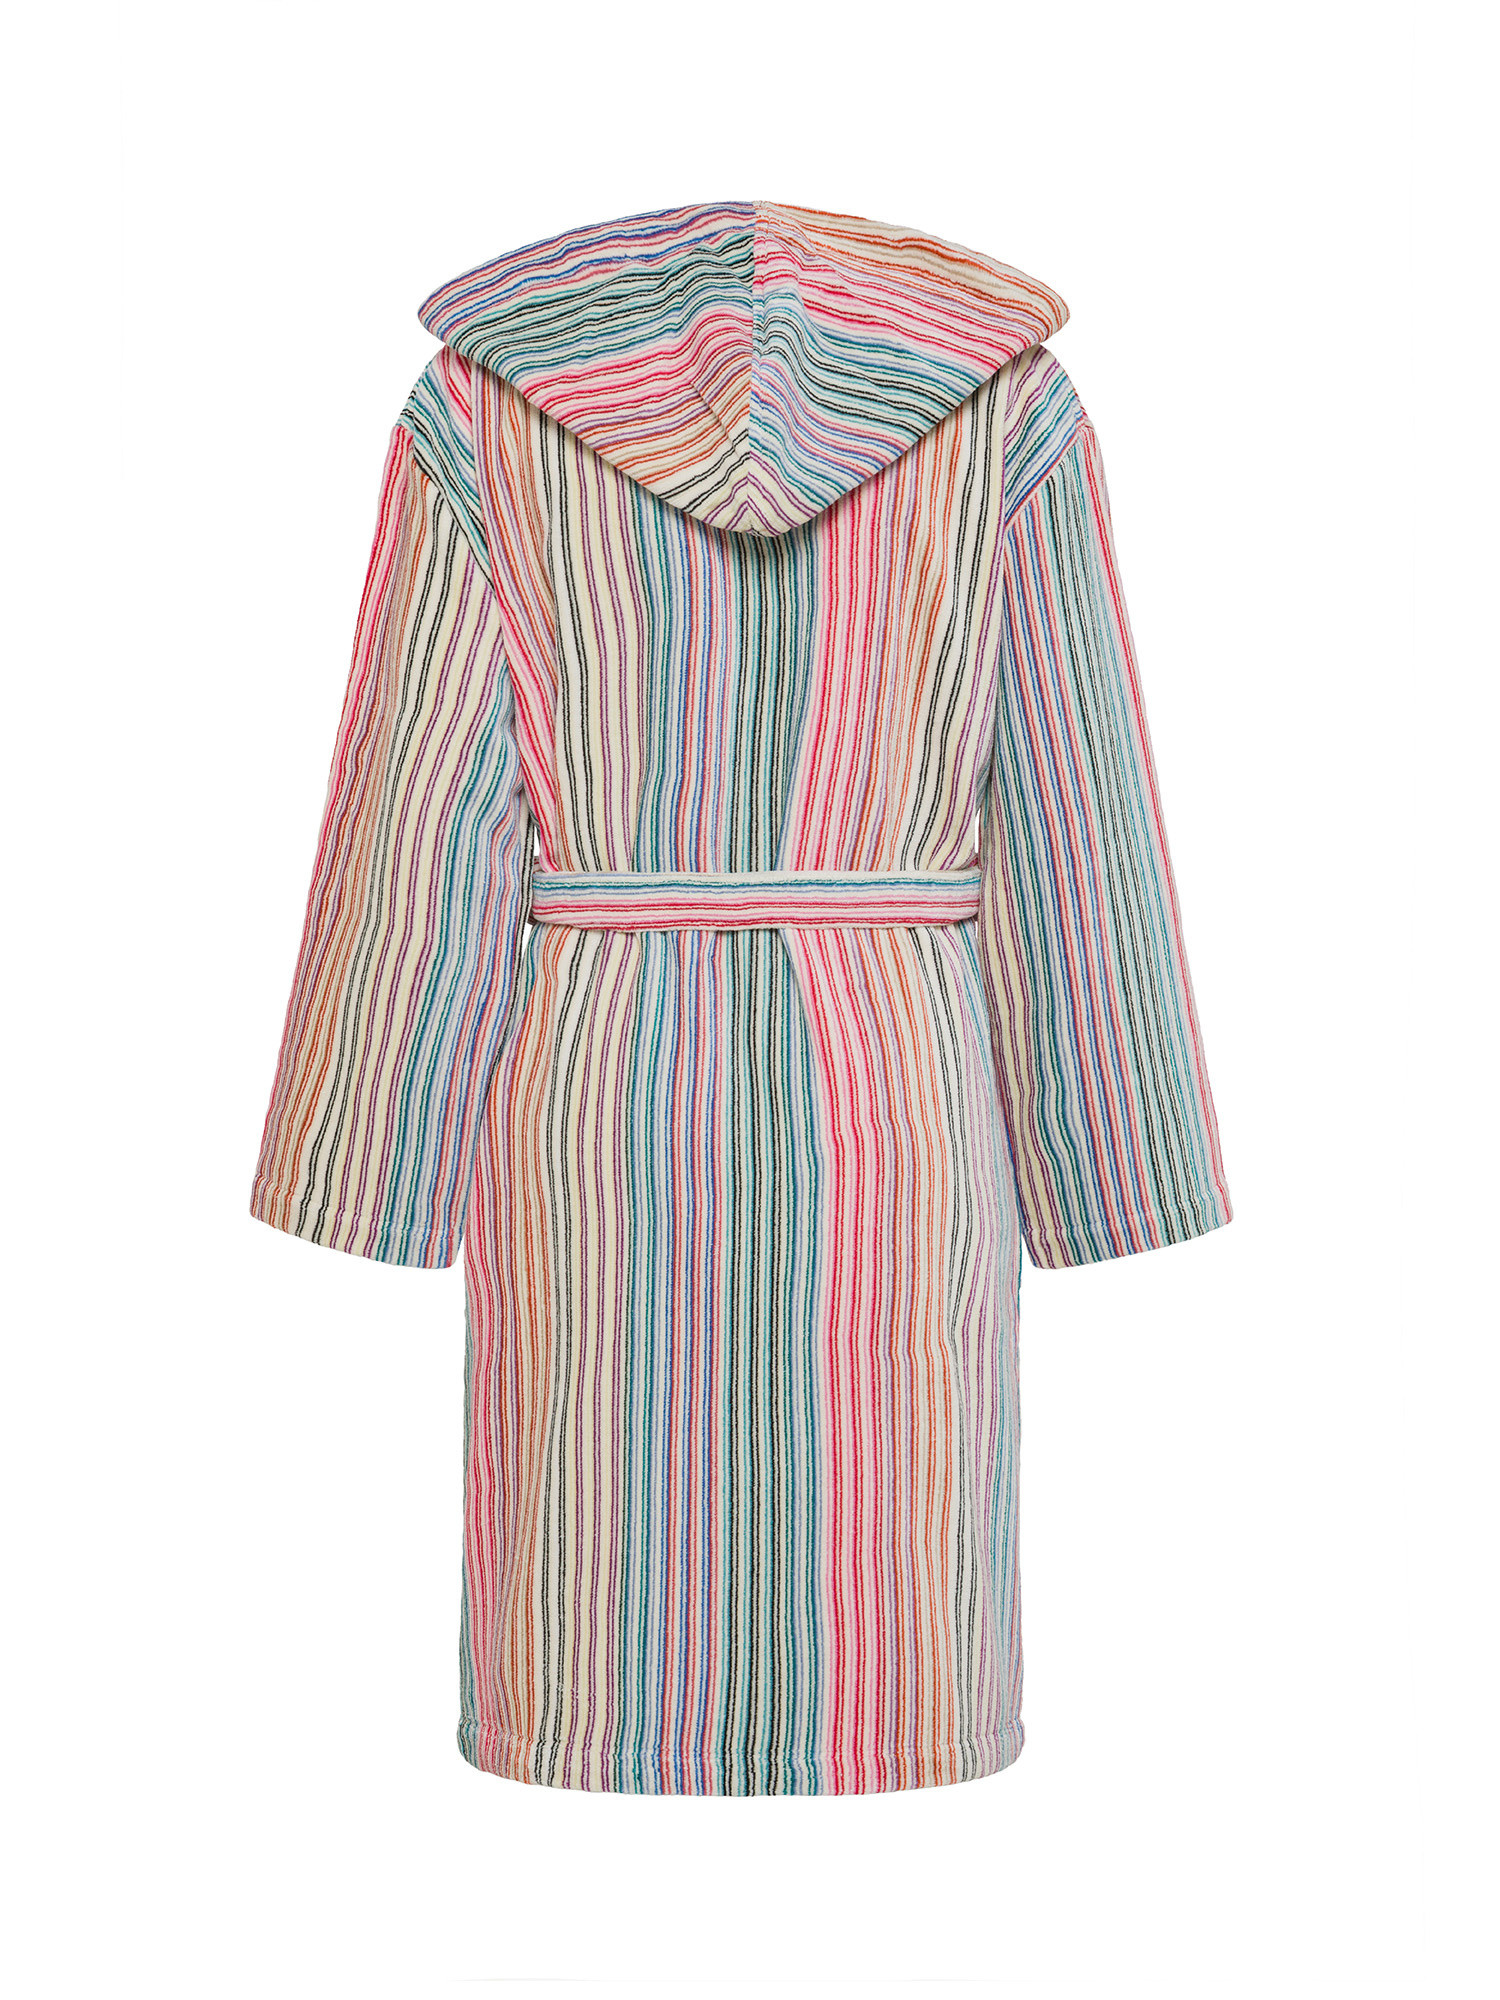 Cotton terry bathrobe striped pattern, Multicolor, large image number 1